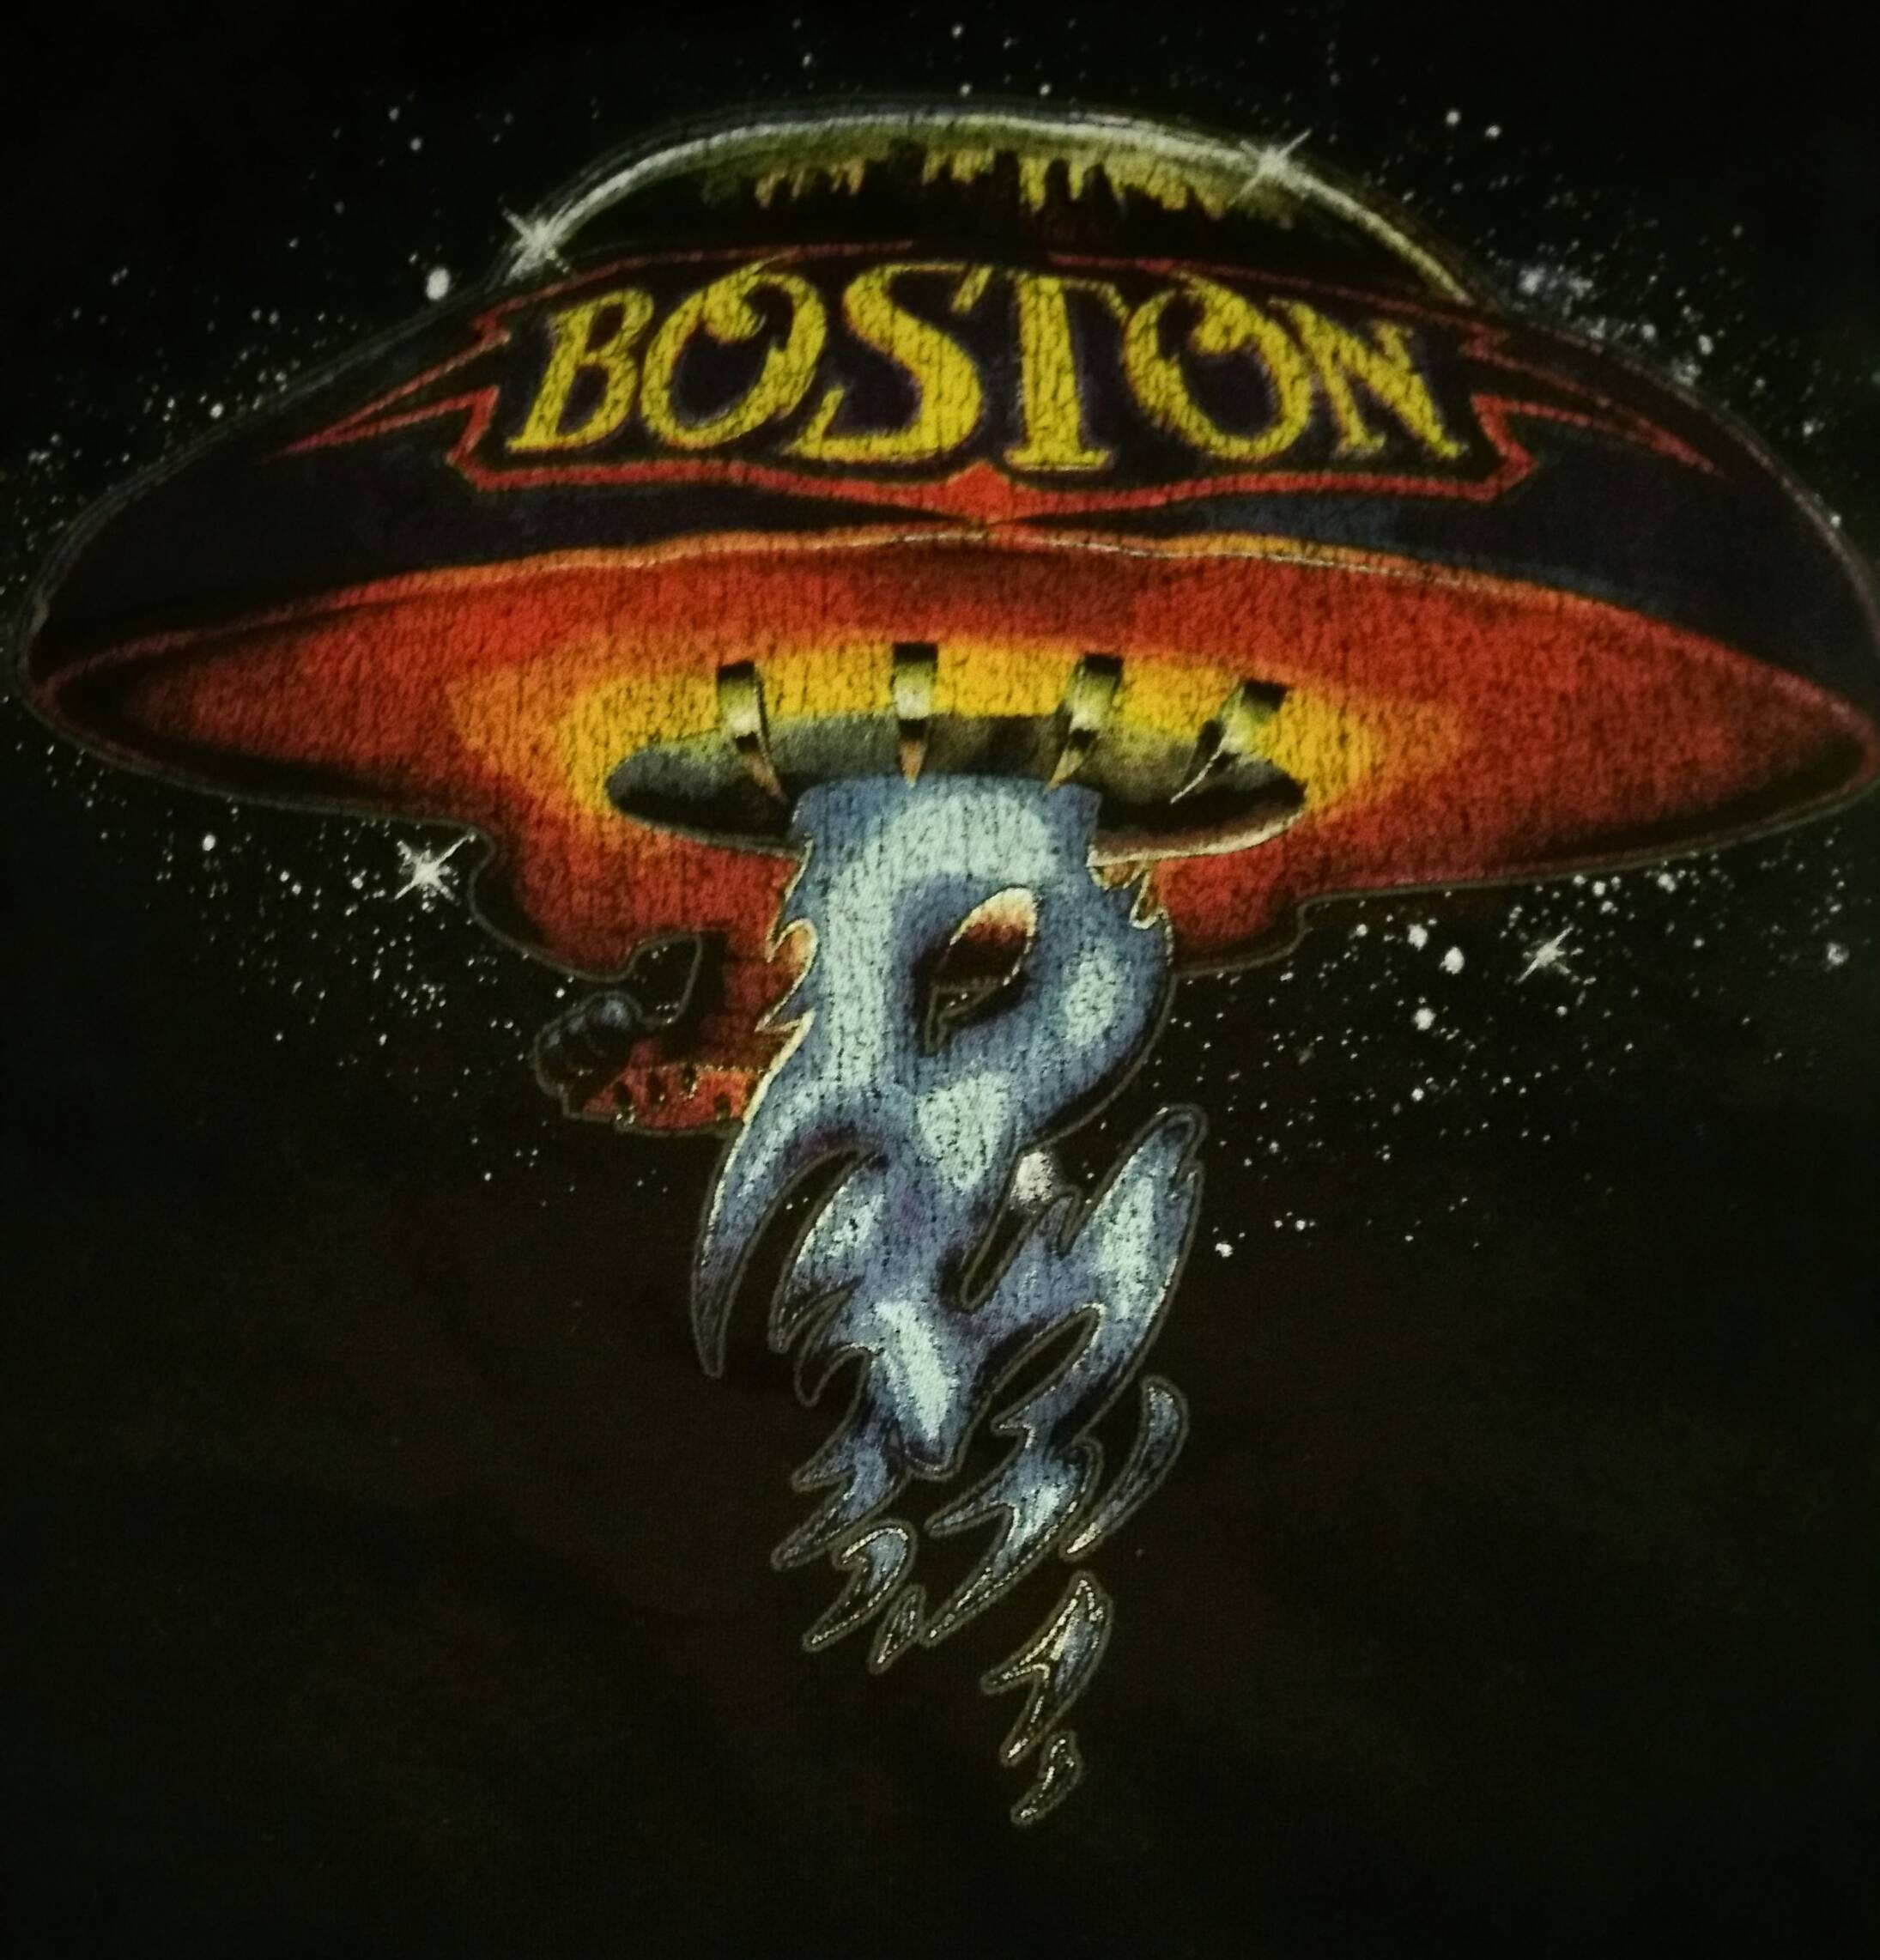 Boston Band Logo - Boston at 40 and rockin' the Joint!. Reason Rest Stop